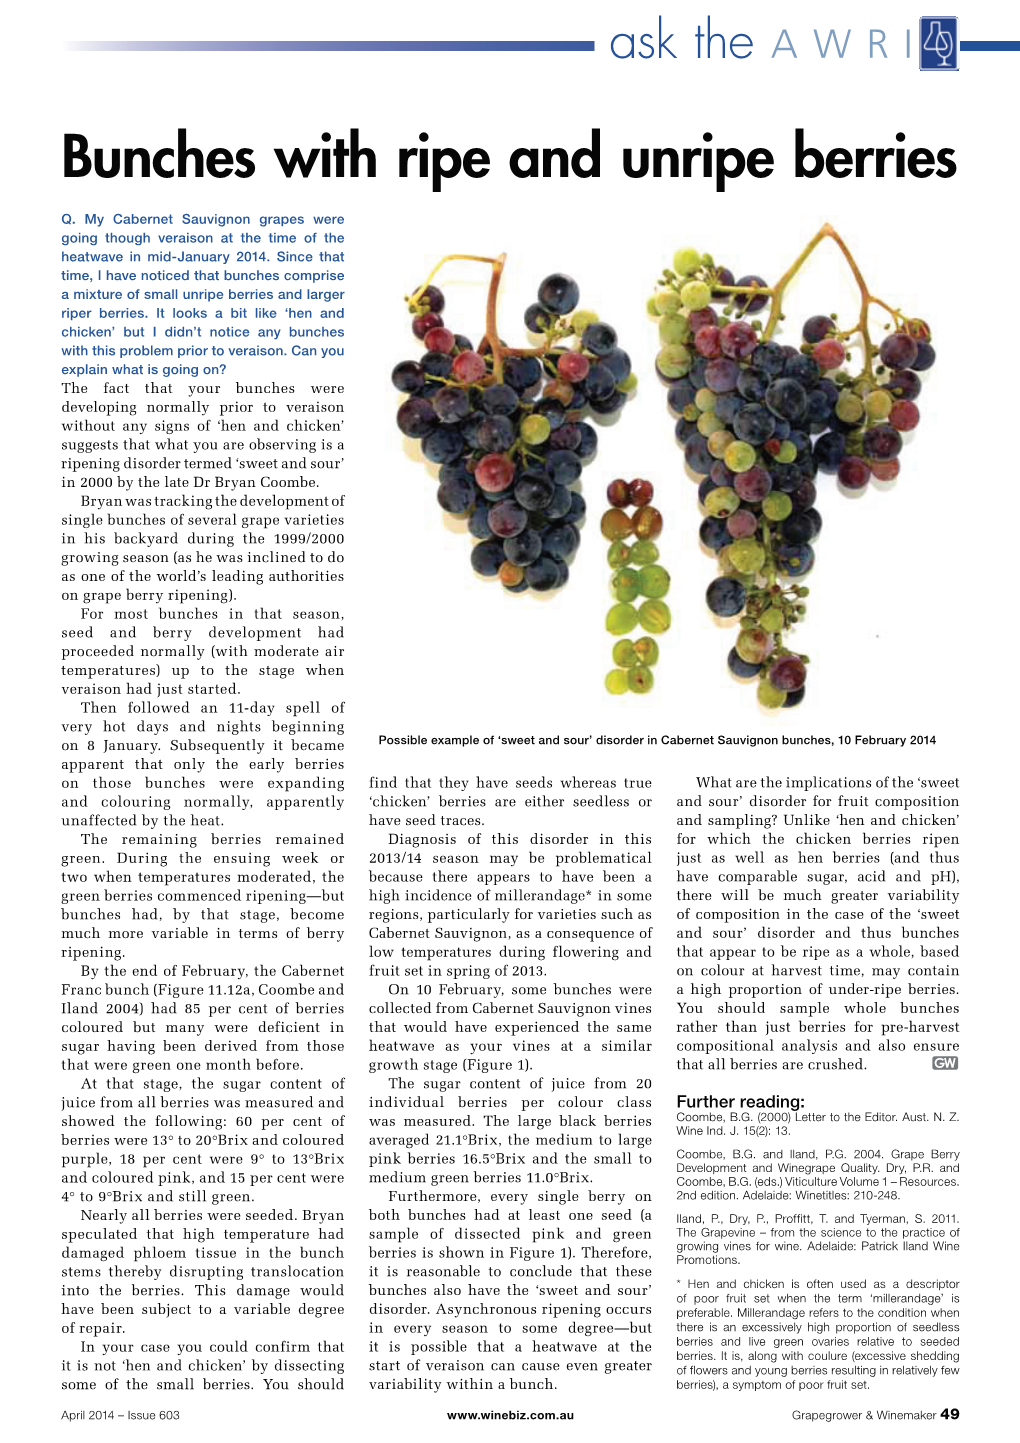 Bunches with Ripe and Unripe Berries (PDF)